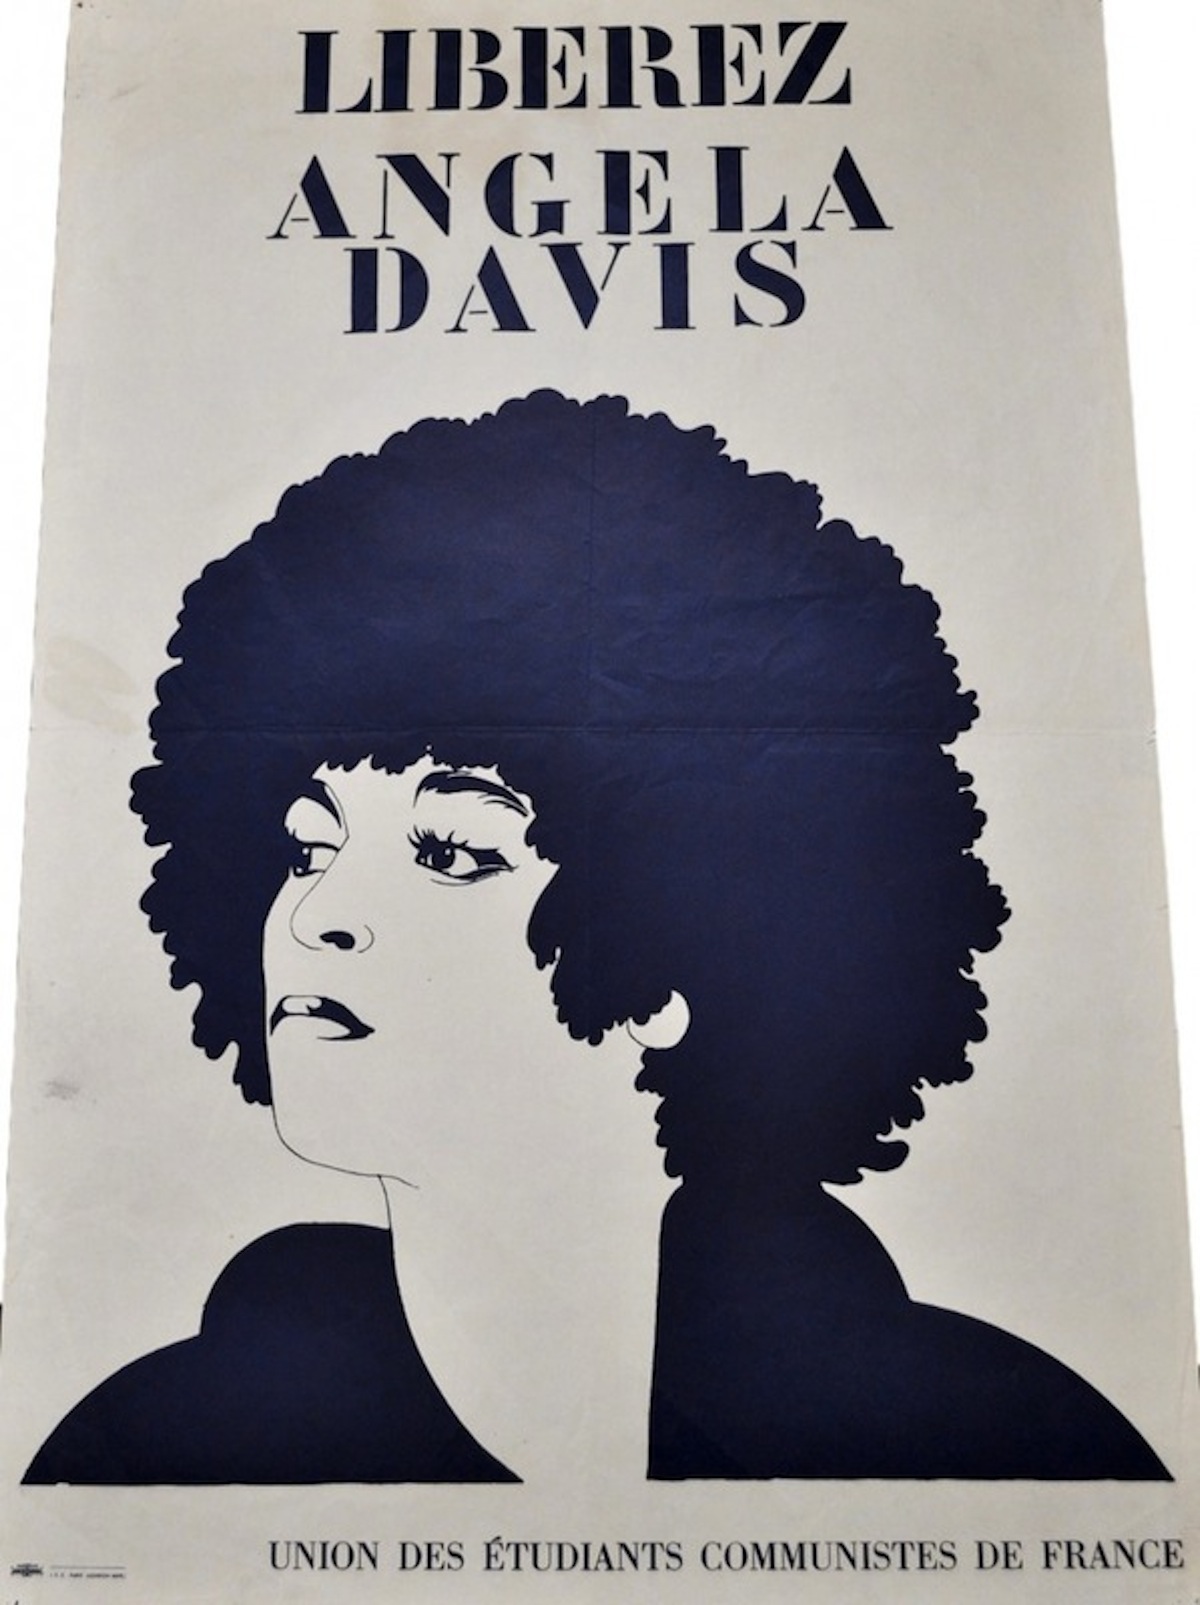 A French “Free Angela” poster highlights Davis’s beauty.